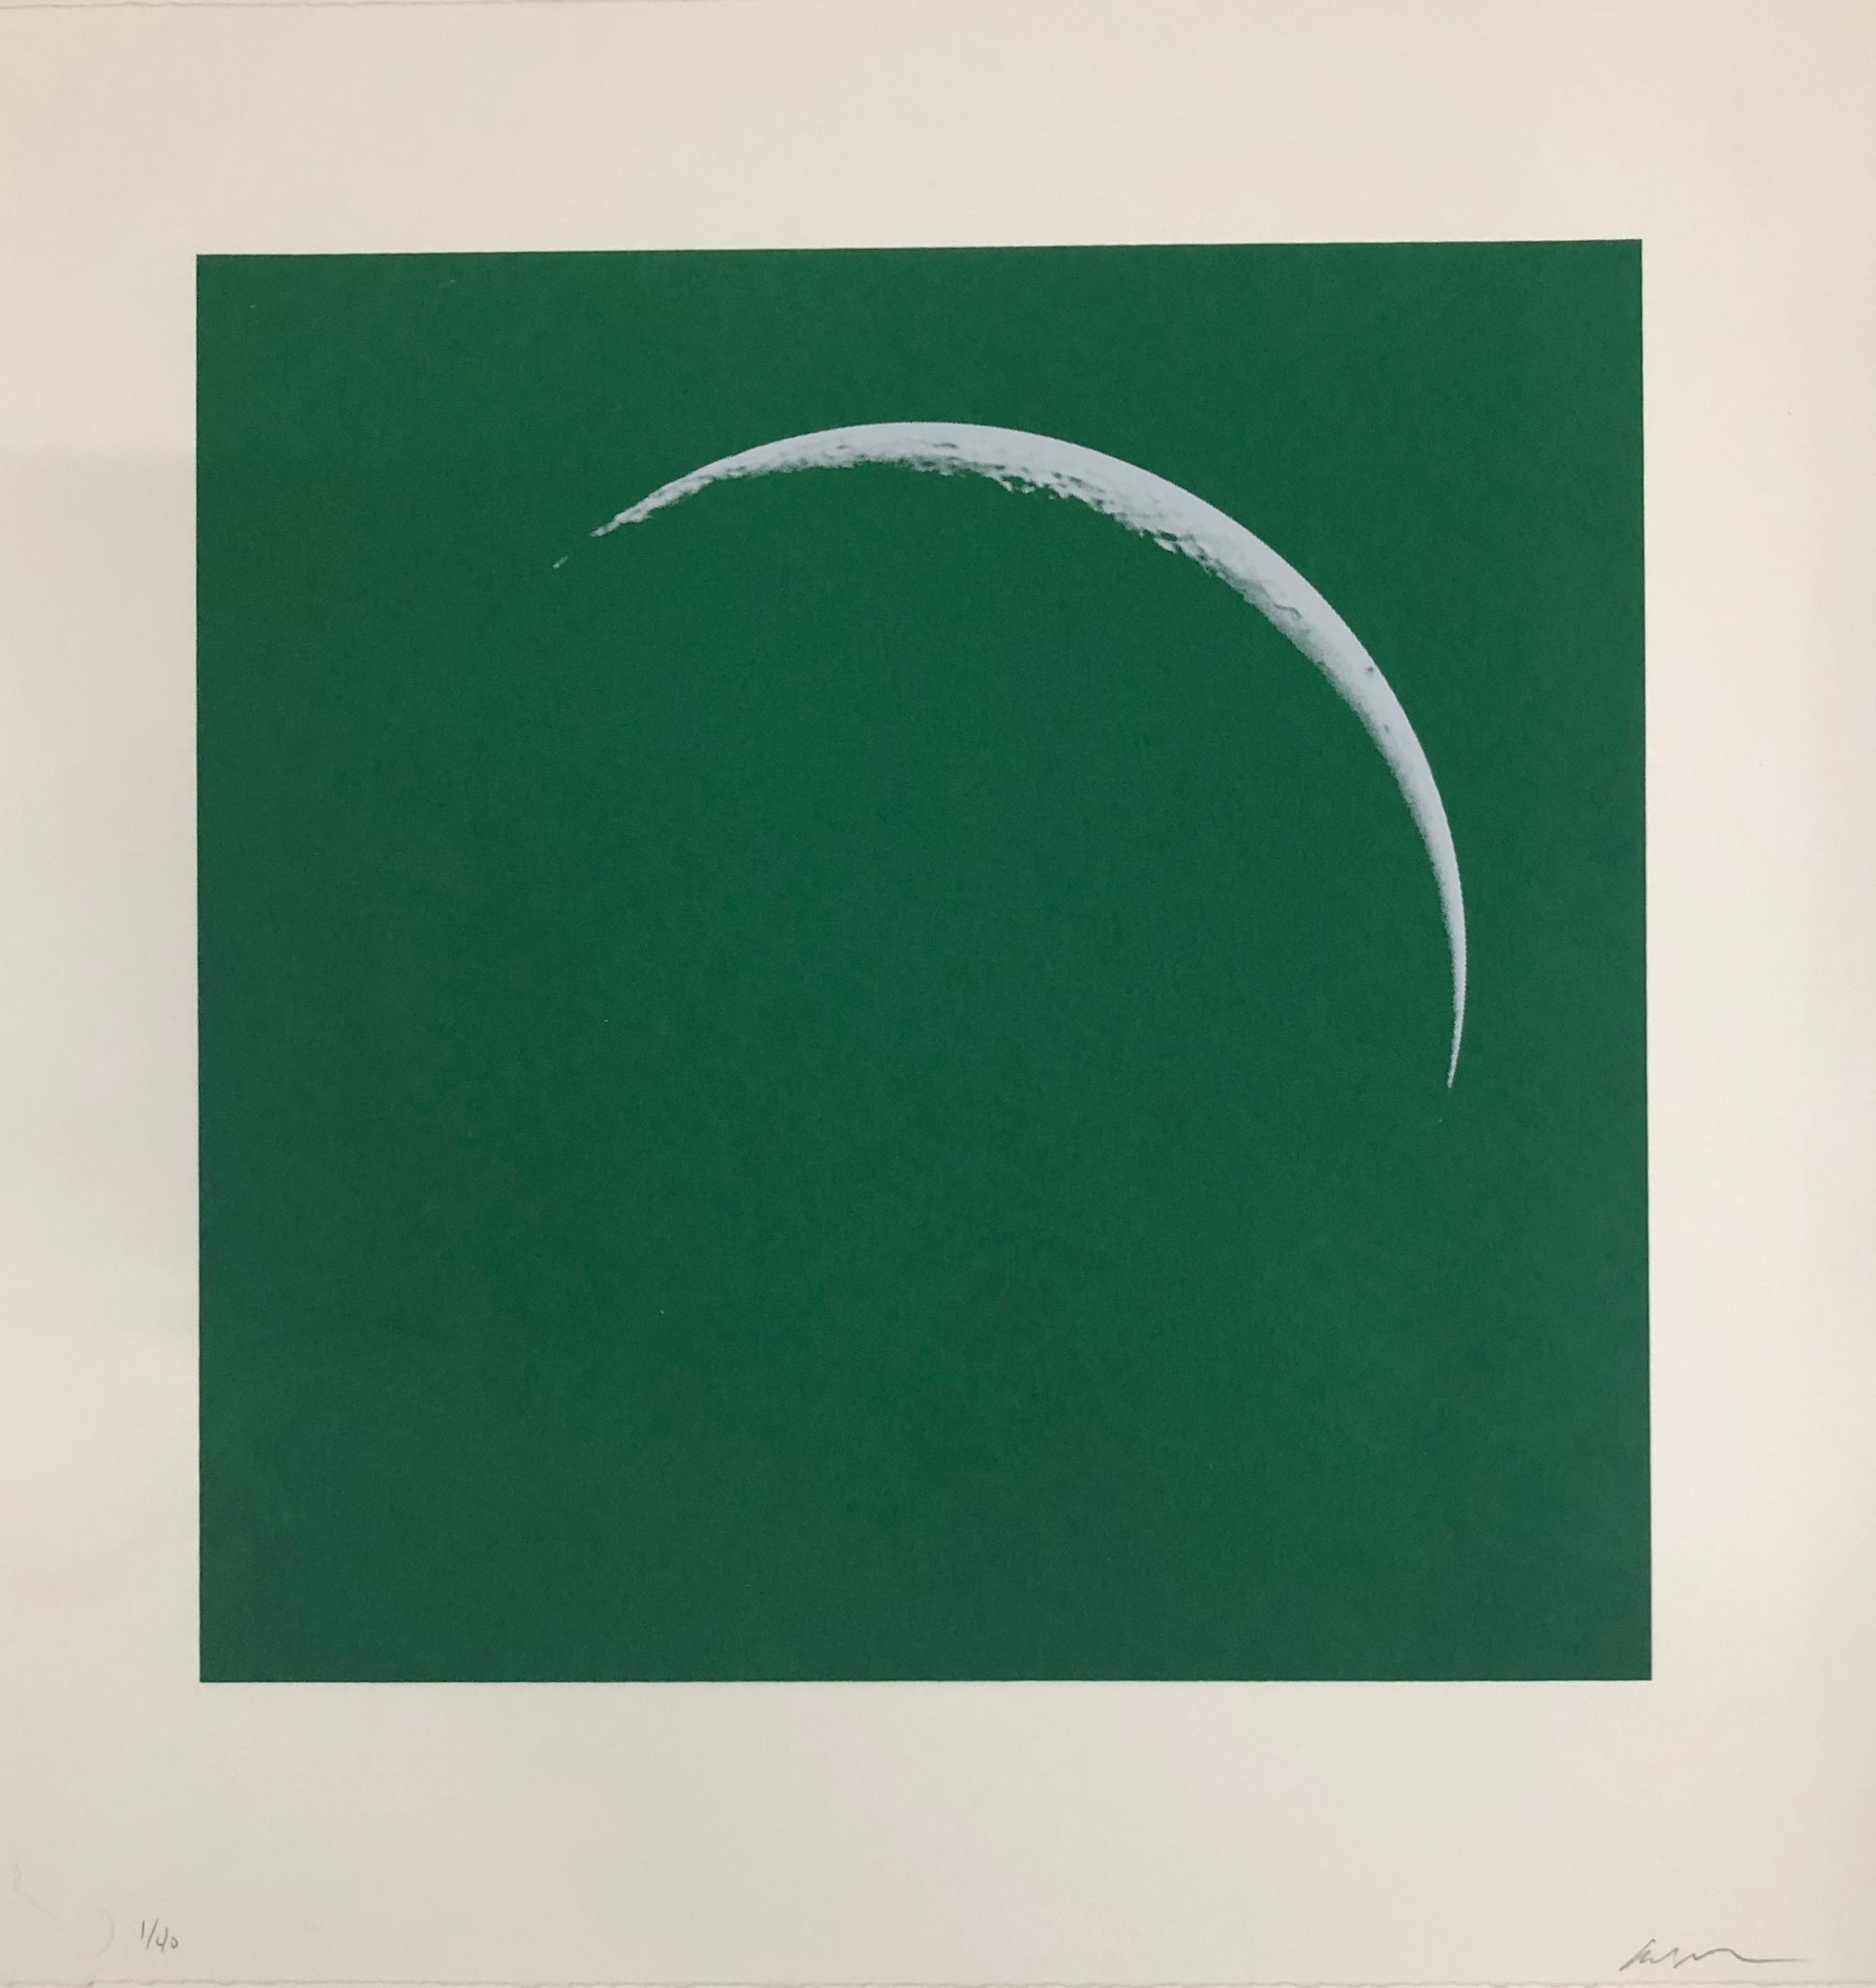 Moon Portraits - Crescent Moon - January 14, 2018 (Green) by Andy Gershon - Mourlot Editions - Fine_Art - Poster - Lithograph - Wall Art - Vintage - Prints - Original